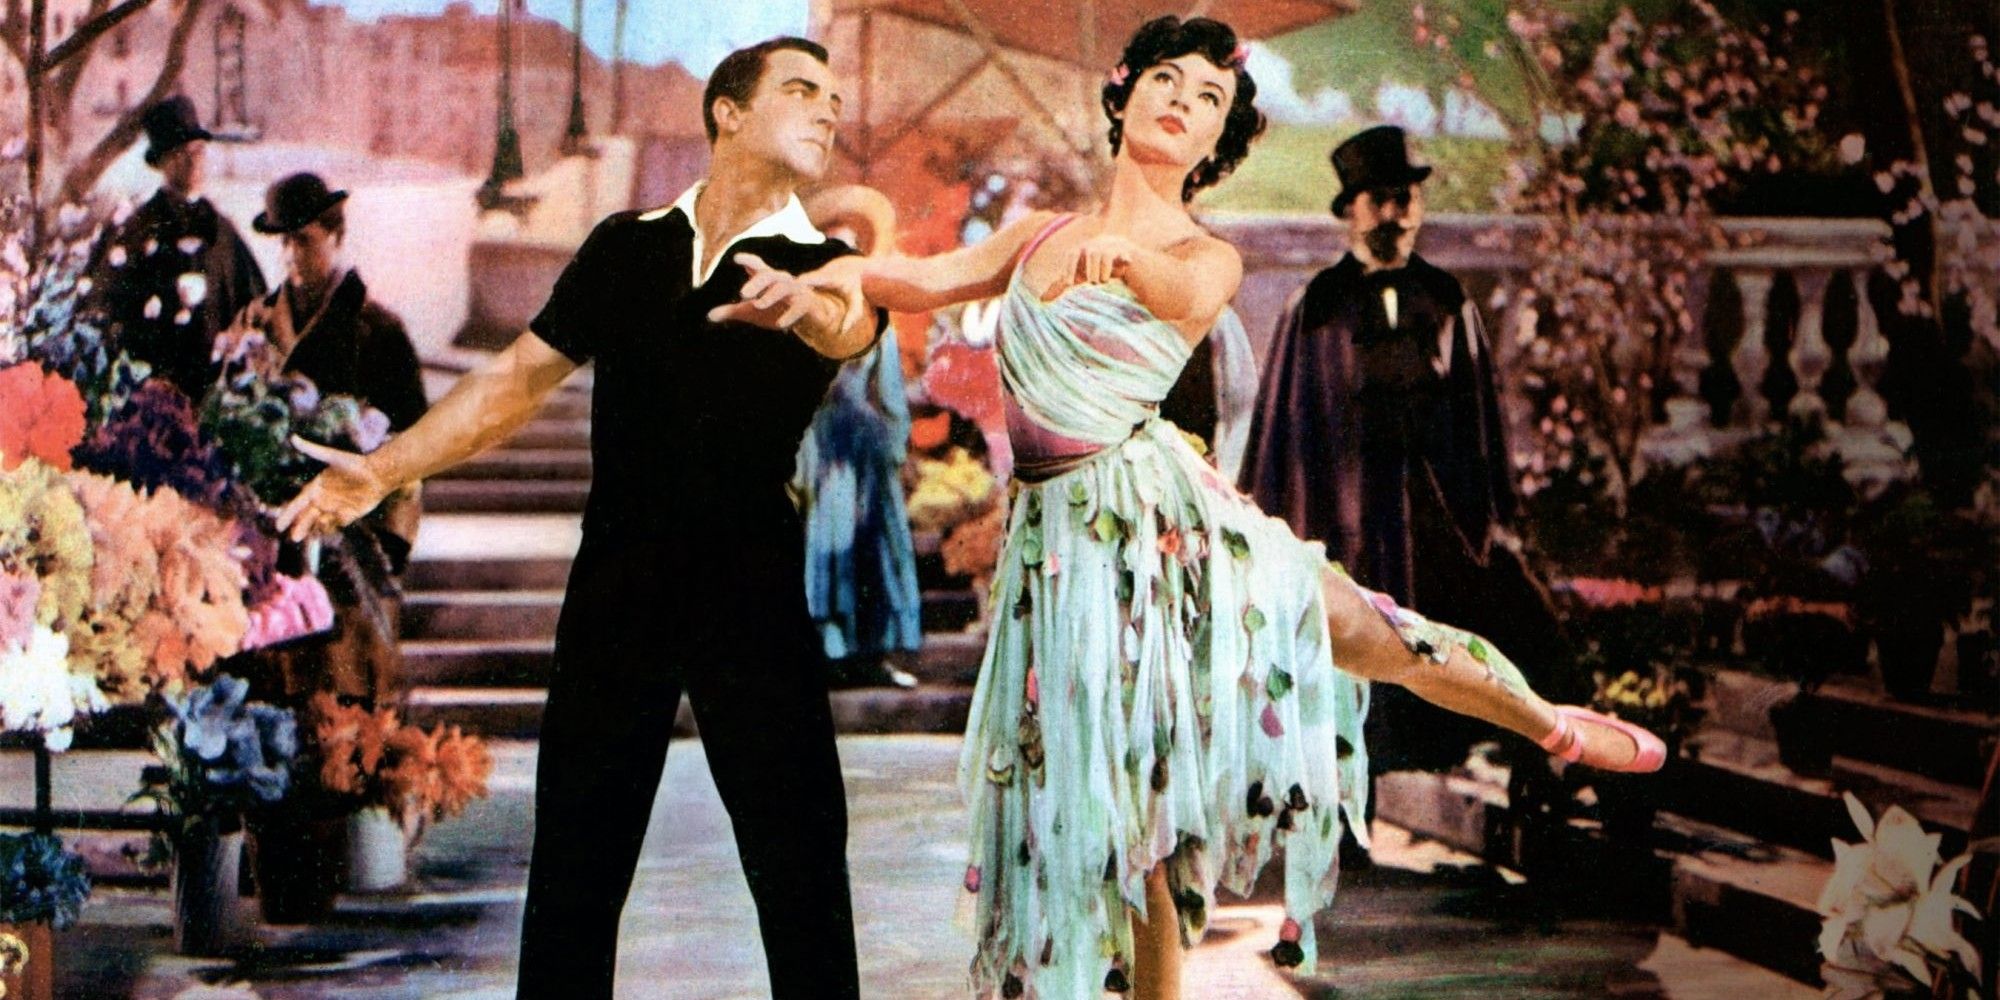 Jerry and Lise dancing in An American in Paris